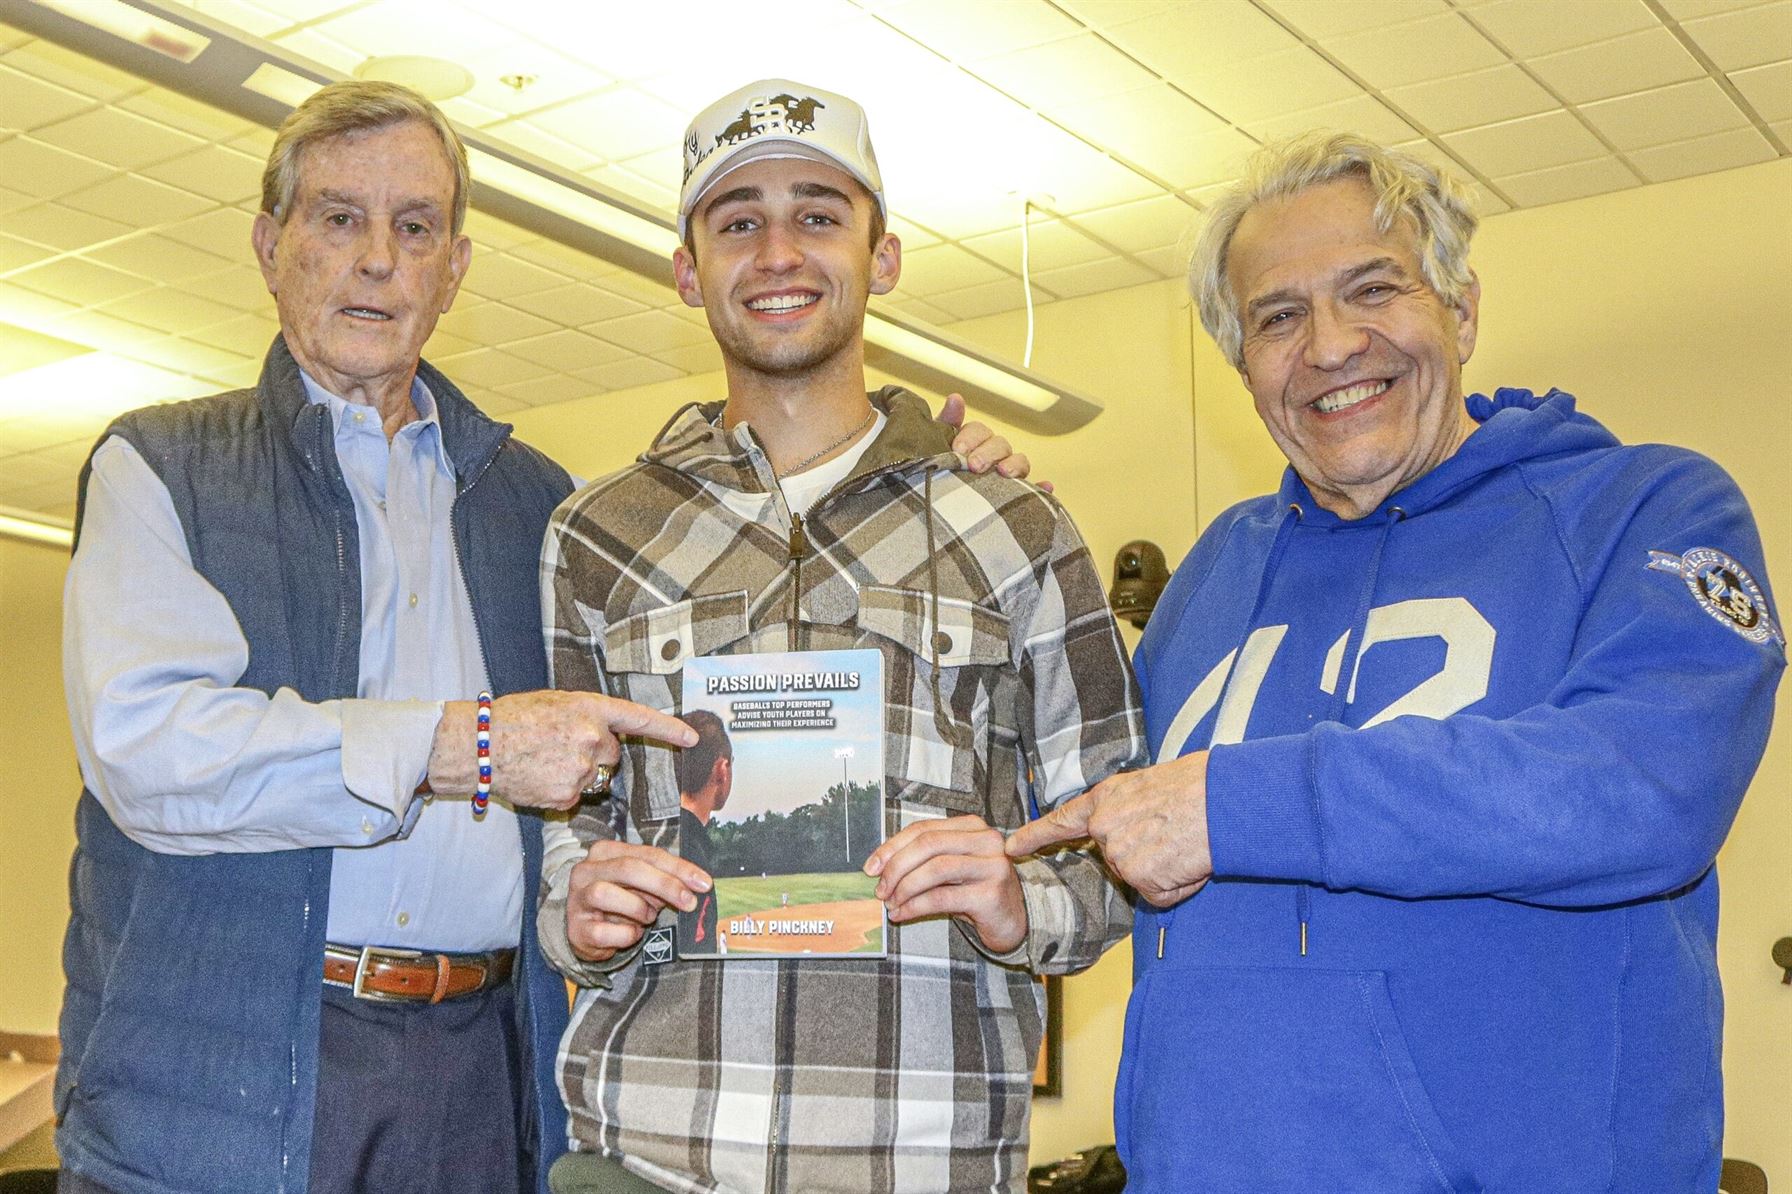 Author Billy Pinckney (middle) holding his book with Montclair professors, Professor McCarthy (left) and Dr. Gilbert (right).  Photo courtesy of Billy Pinckney.